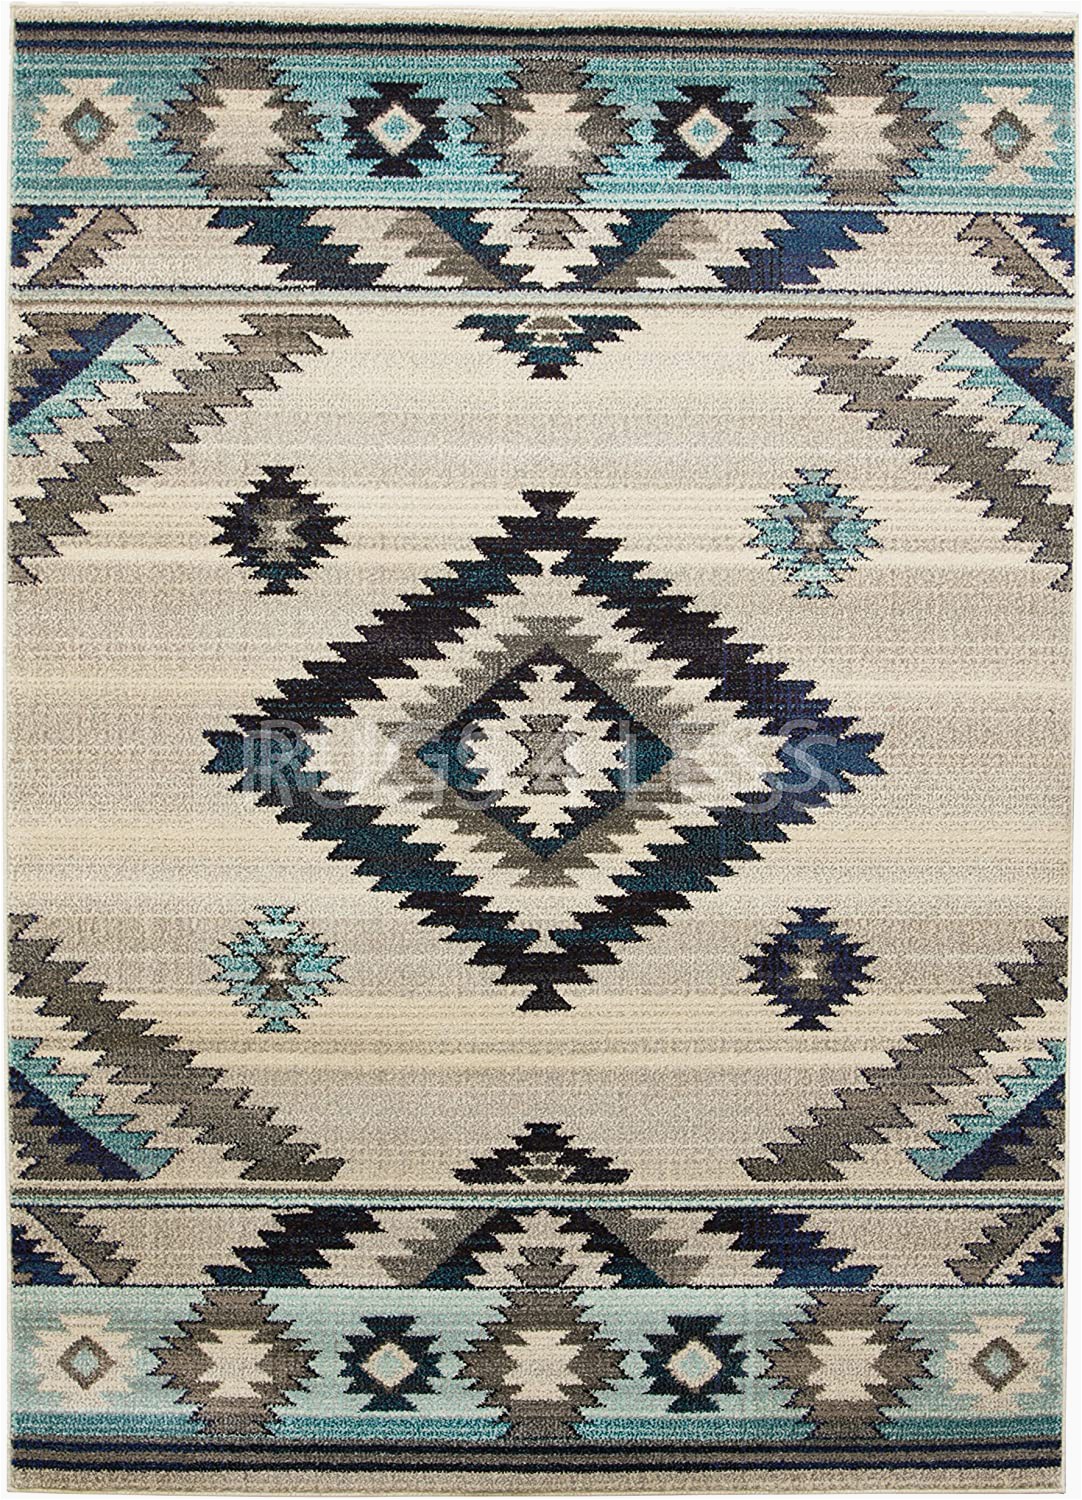 5ft by 7ft area Rug Amazon Western southwestern Native American Indian area